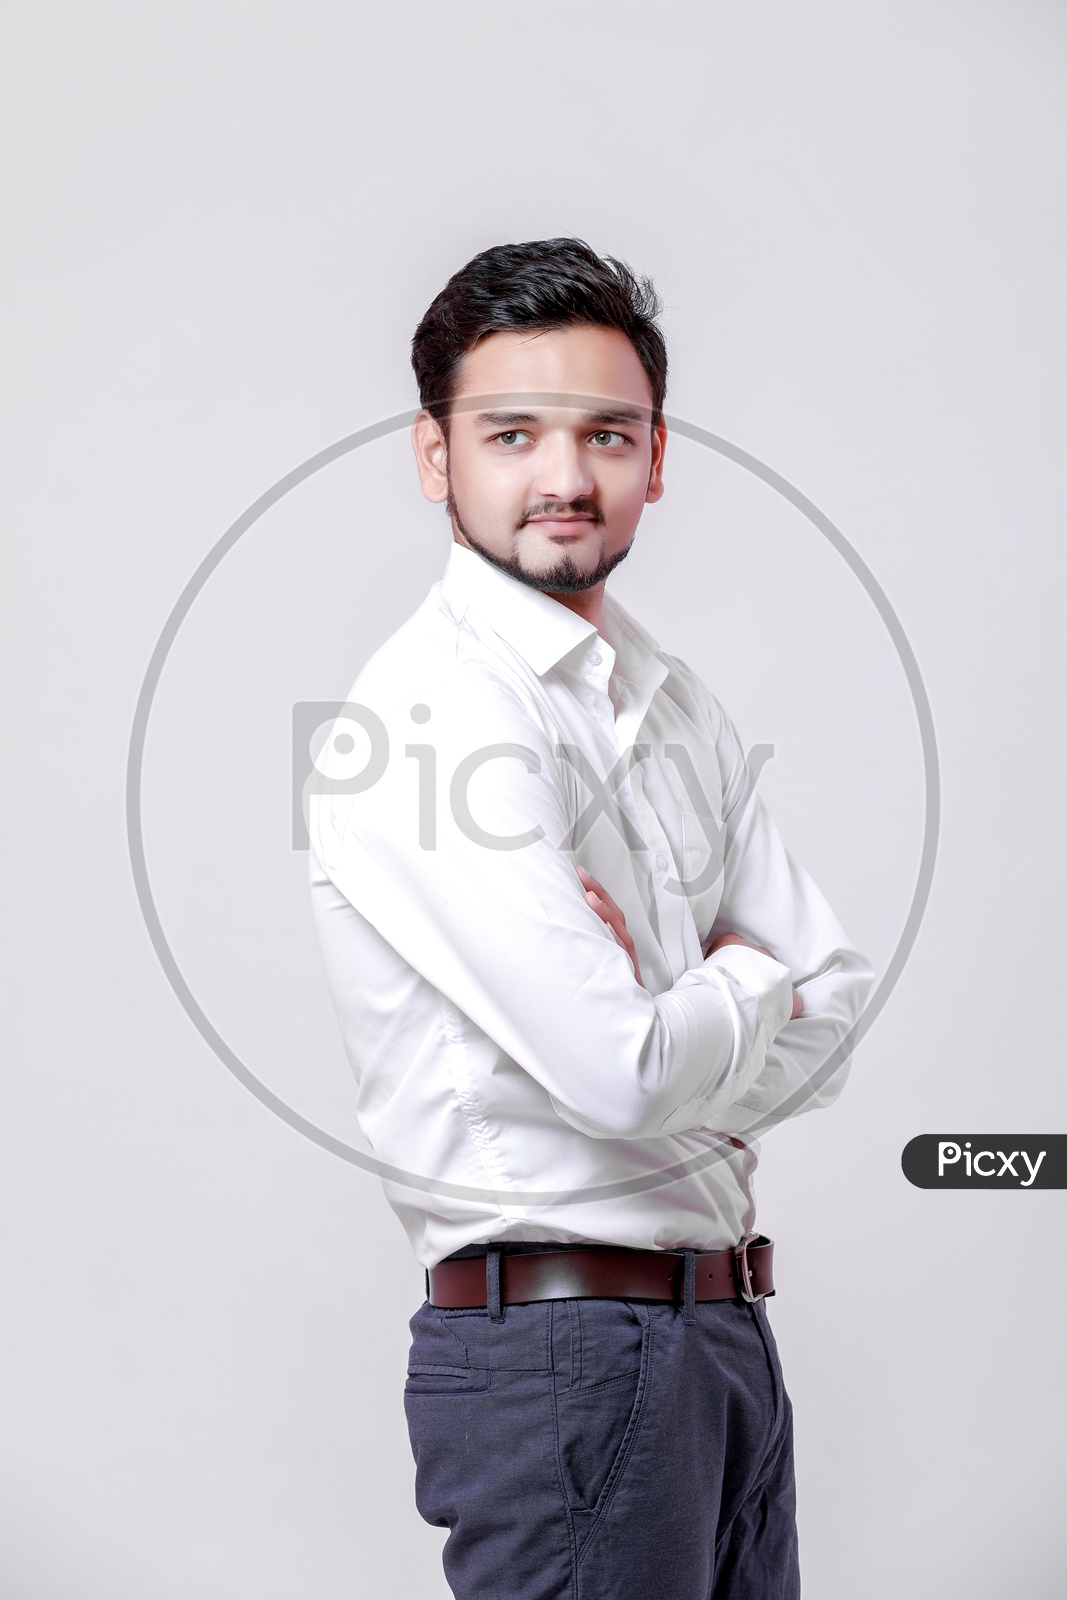 Indian Young Professional Man With a Smiling Face On an Isolated White Background